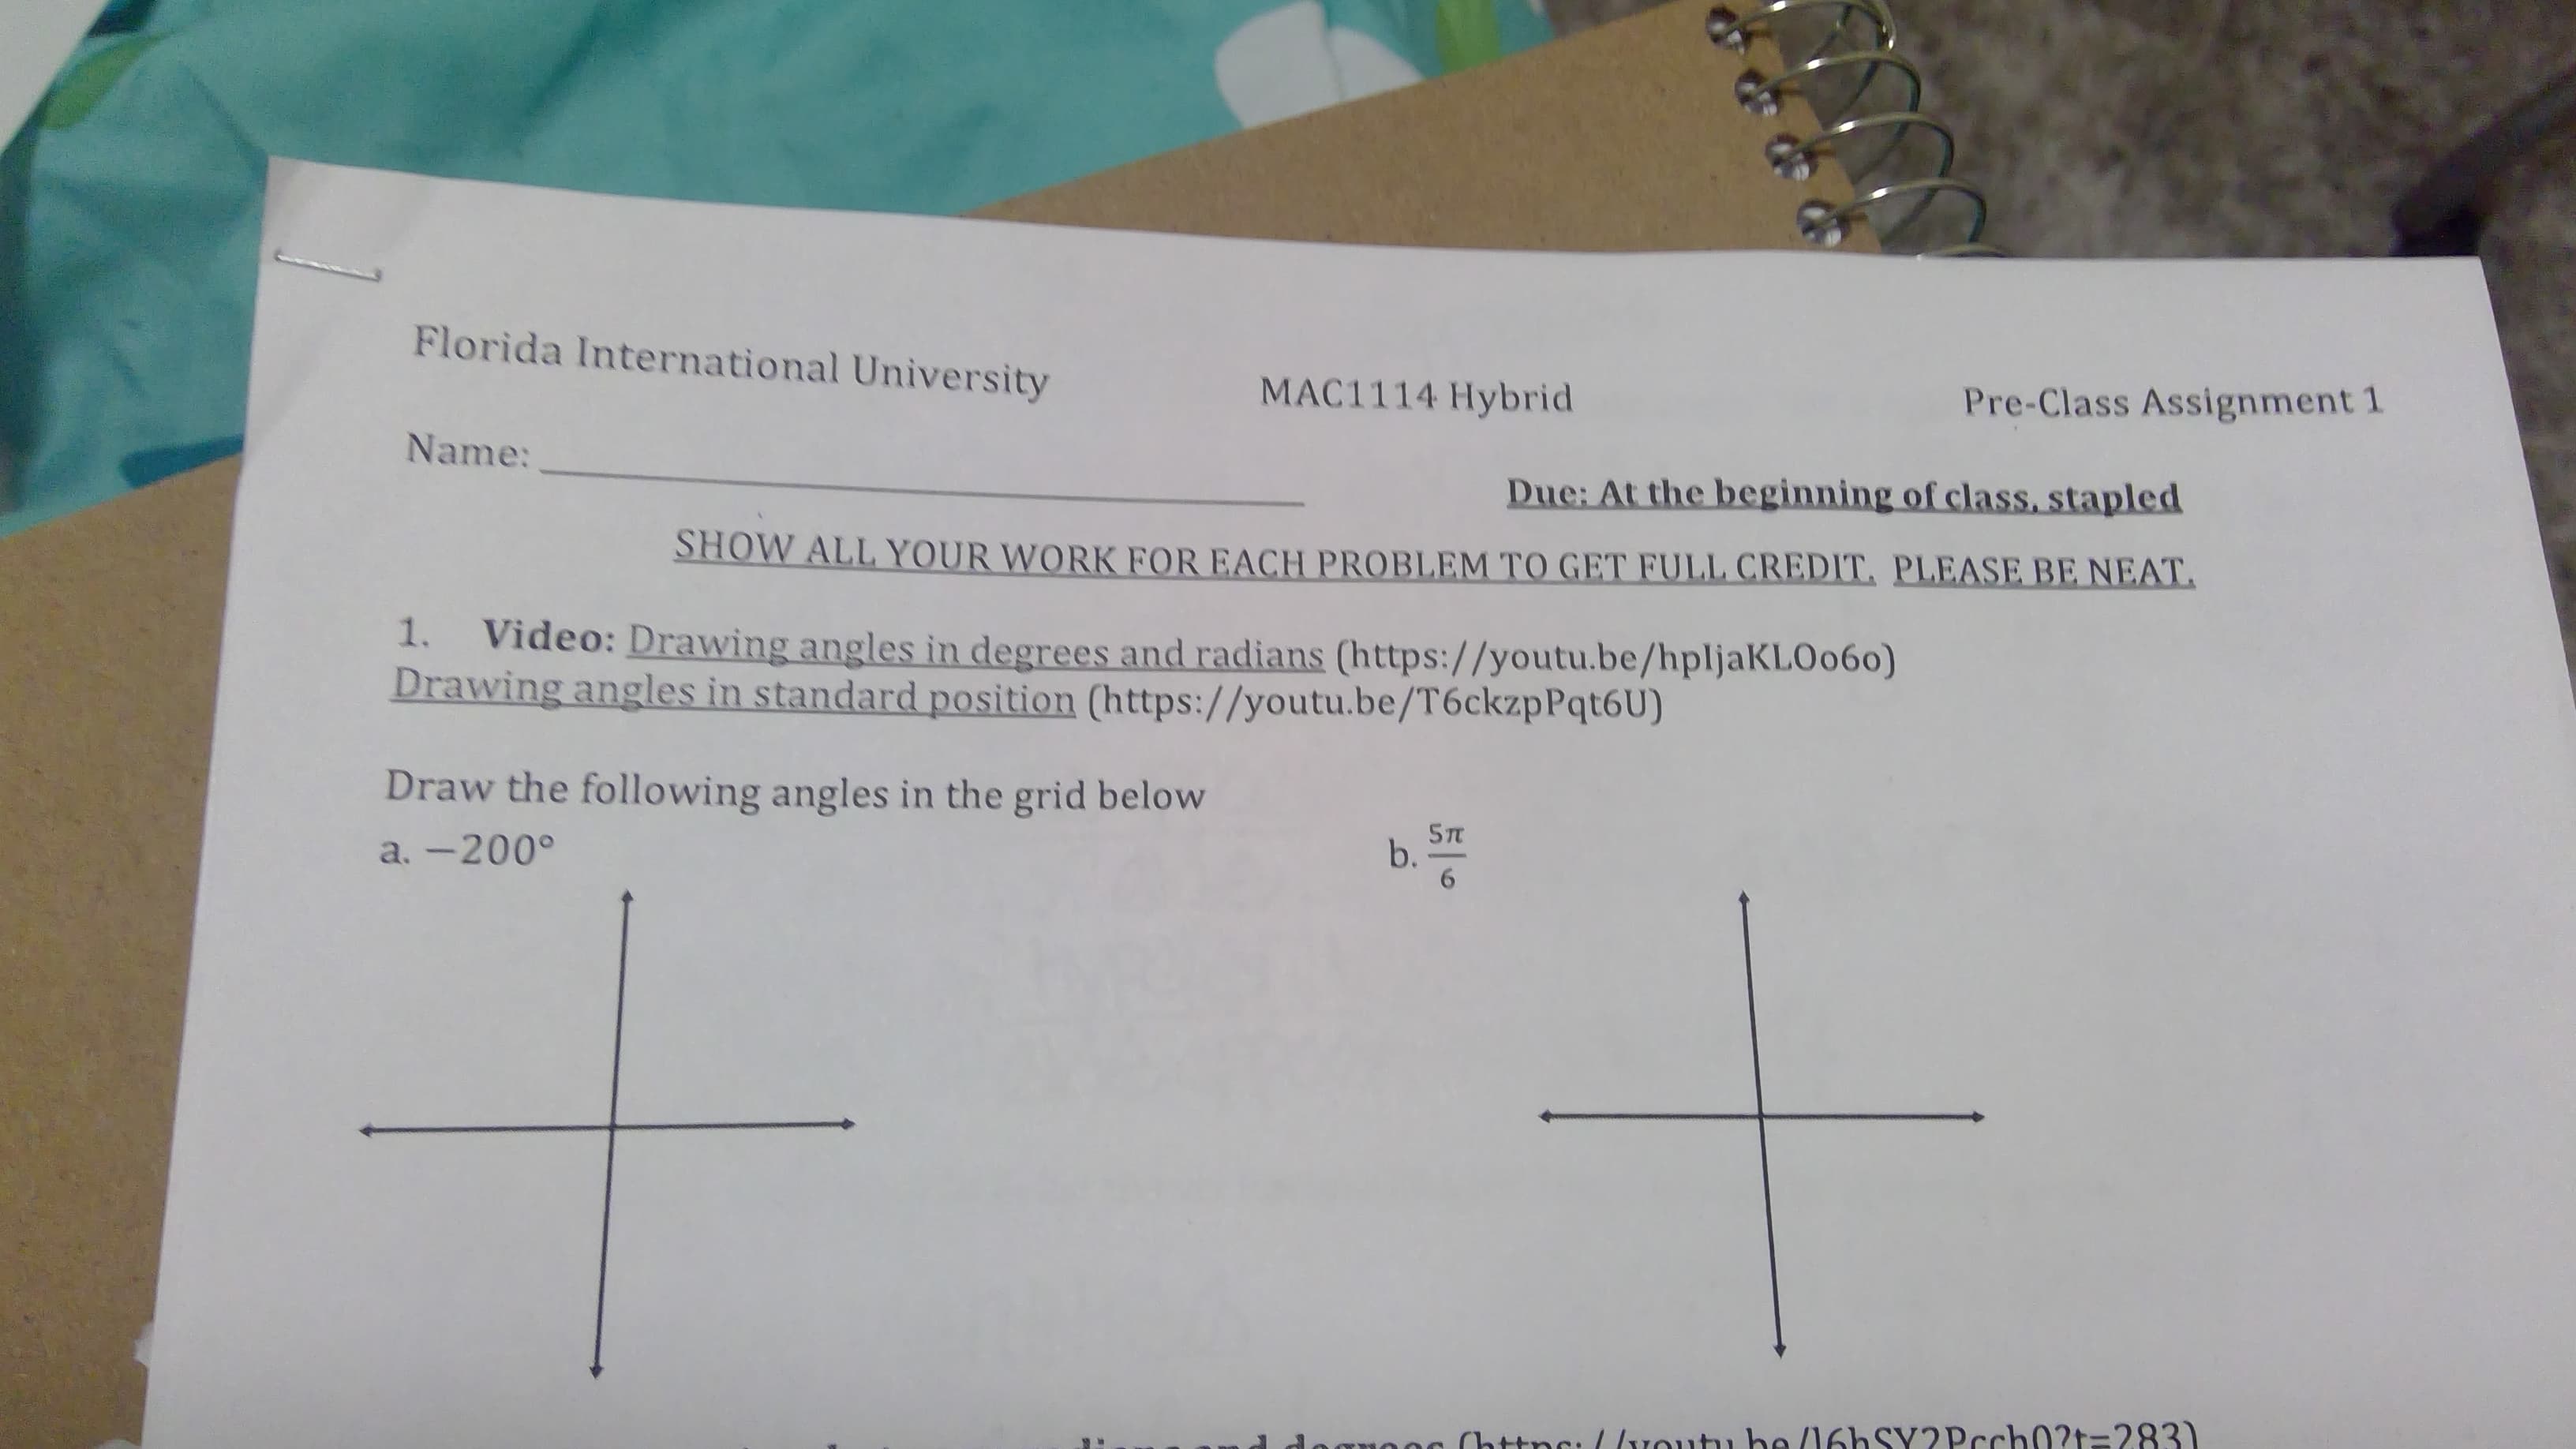 Florida International University
MAC1114 Hybrid
Pre-Class Assignment 1
Name:
Due: At the beginning of class, stapled
SHOW ALL YOUR WORK FOR EACH PROBLEM TO GET FULL CREDIT, PLEASE BE NEAT.
Video: Drawing angles in degrees and radians (https://youtu.be/hpljaKLOo60)
Drawing angles in standard position (https://youtu.be/T6ckzpPqt6U)
1.
Draw the following angles in the grid below
5T
b.
a. -200°
G (httns: (lvoutu be (16hSY2Pcch0?t=283)
a
